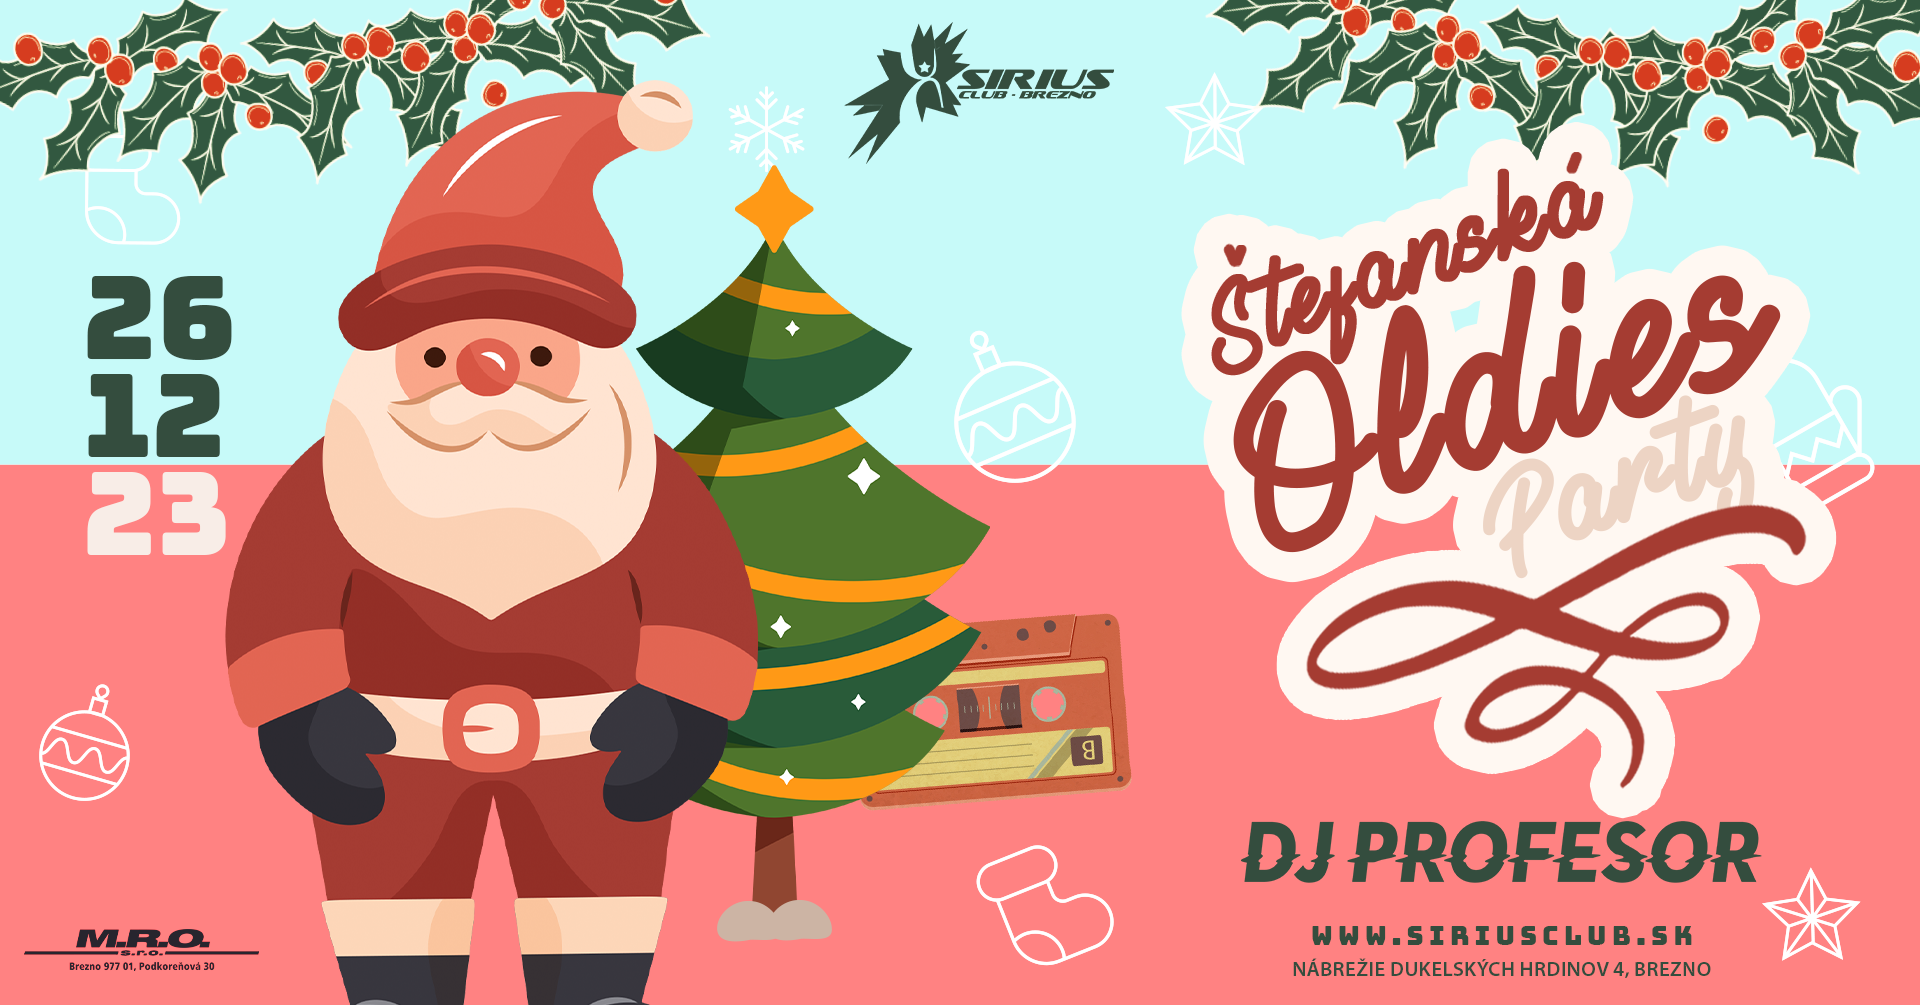 EVENT XMAS OLDIES PARTY 23